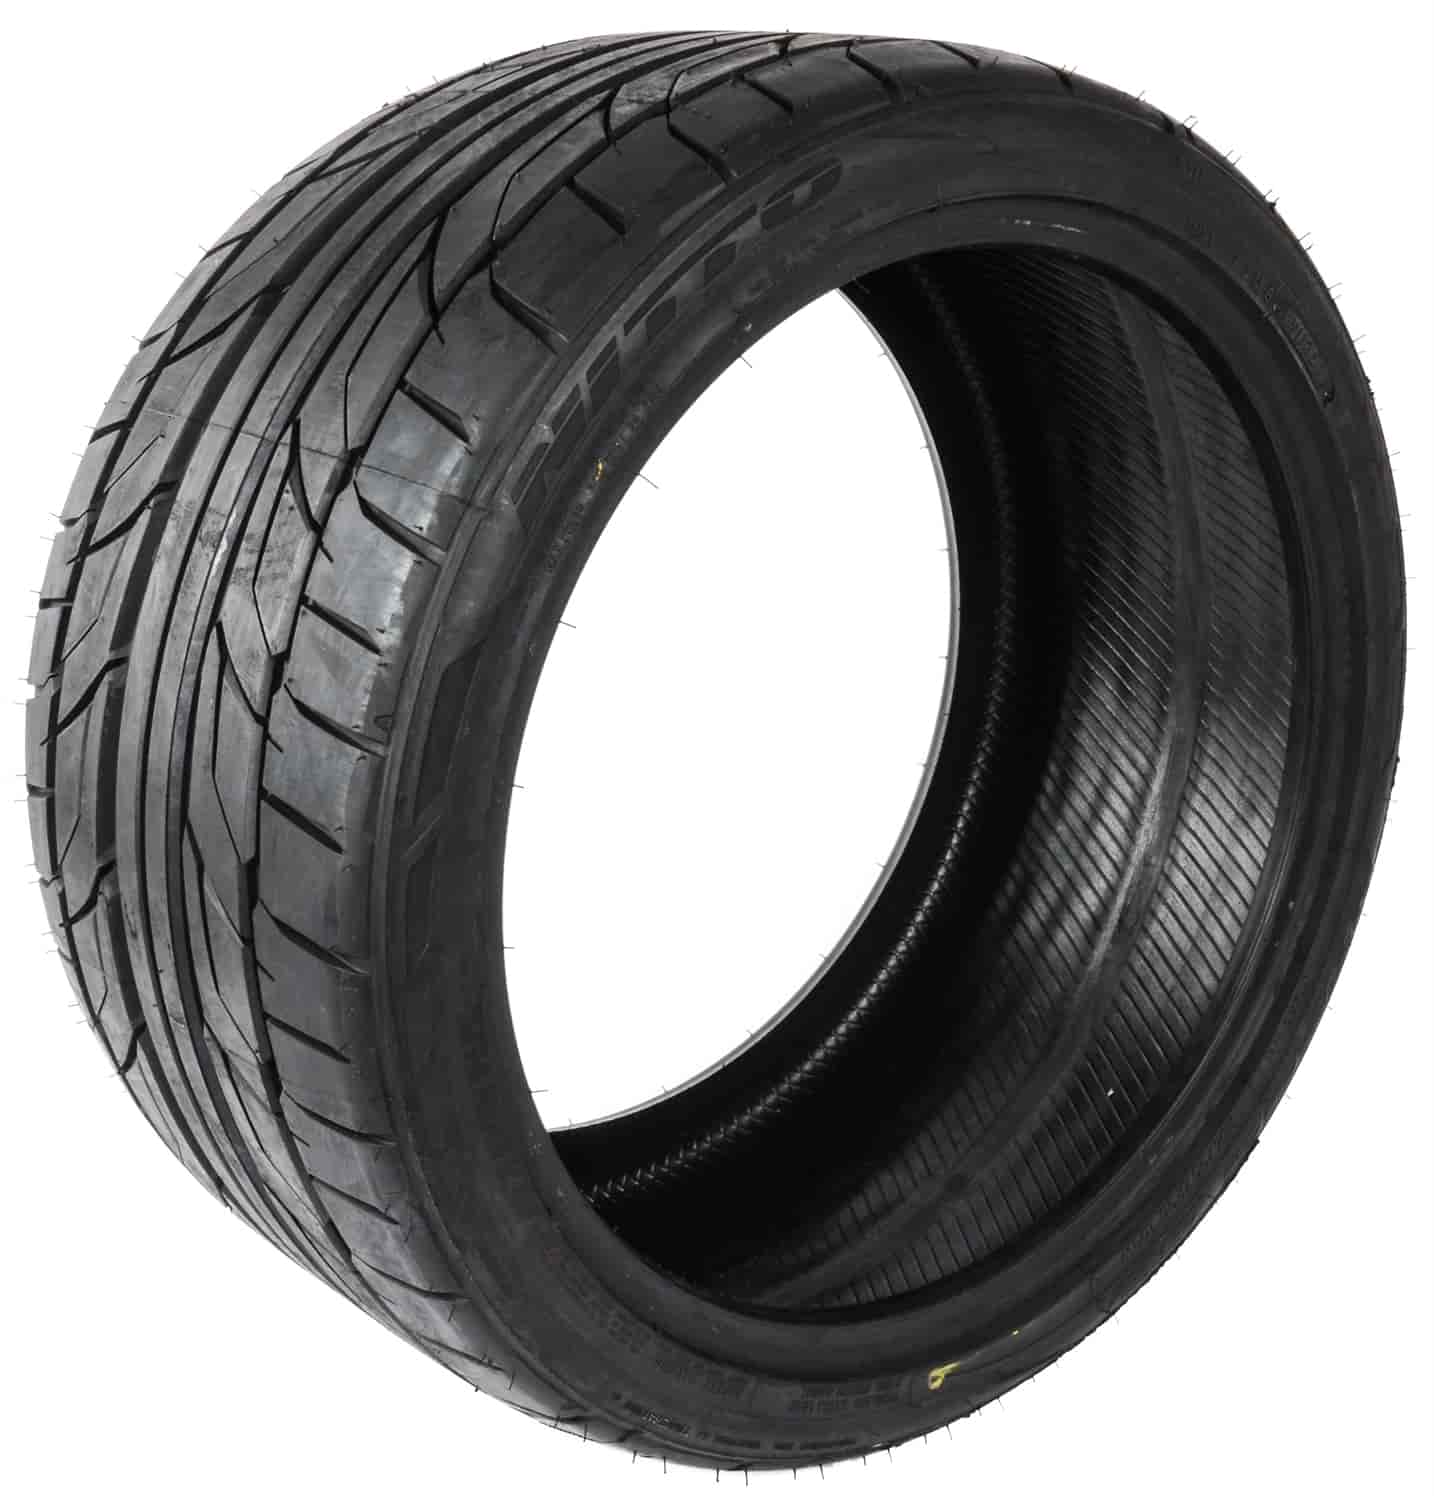 NT555 G2 Summer UHP Radial Tire 305/30R20